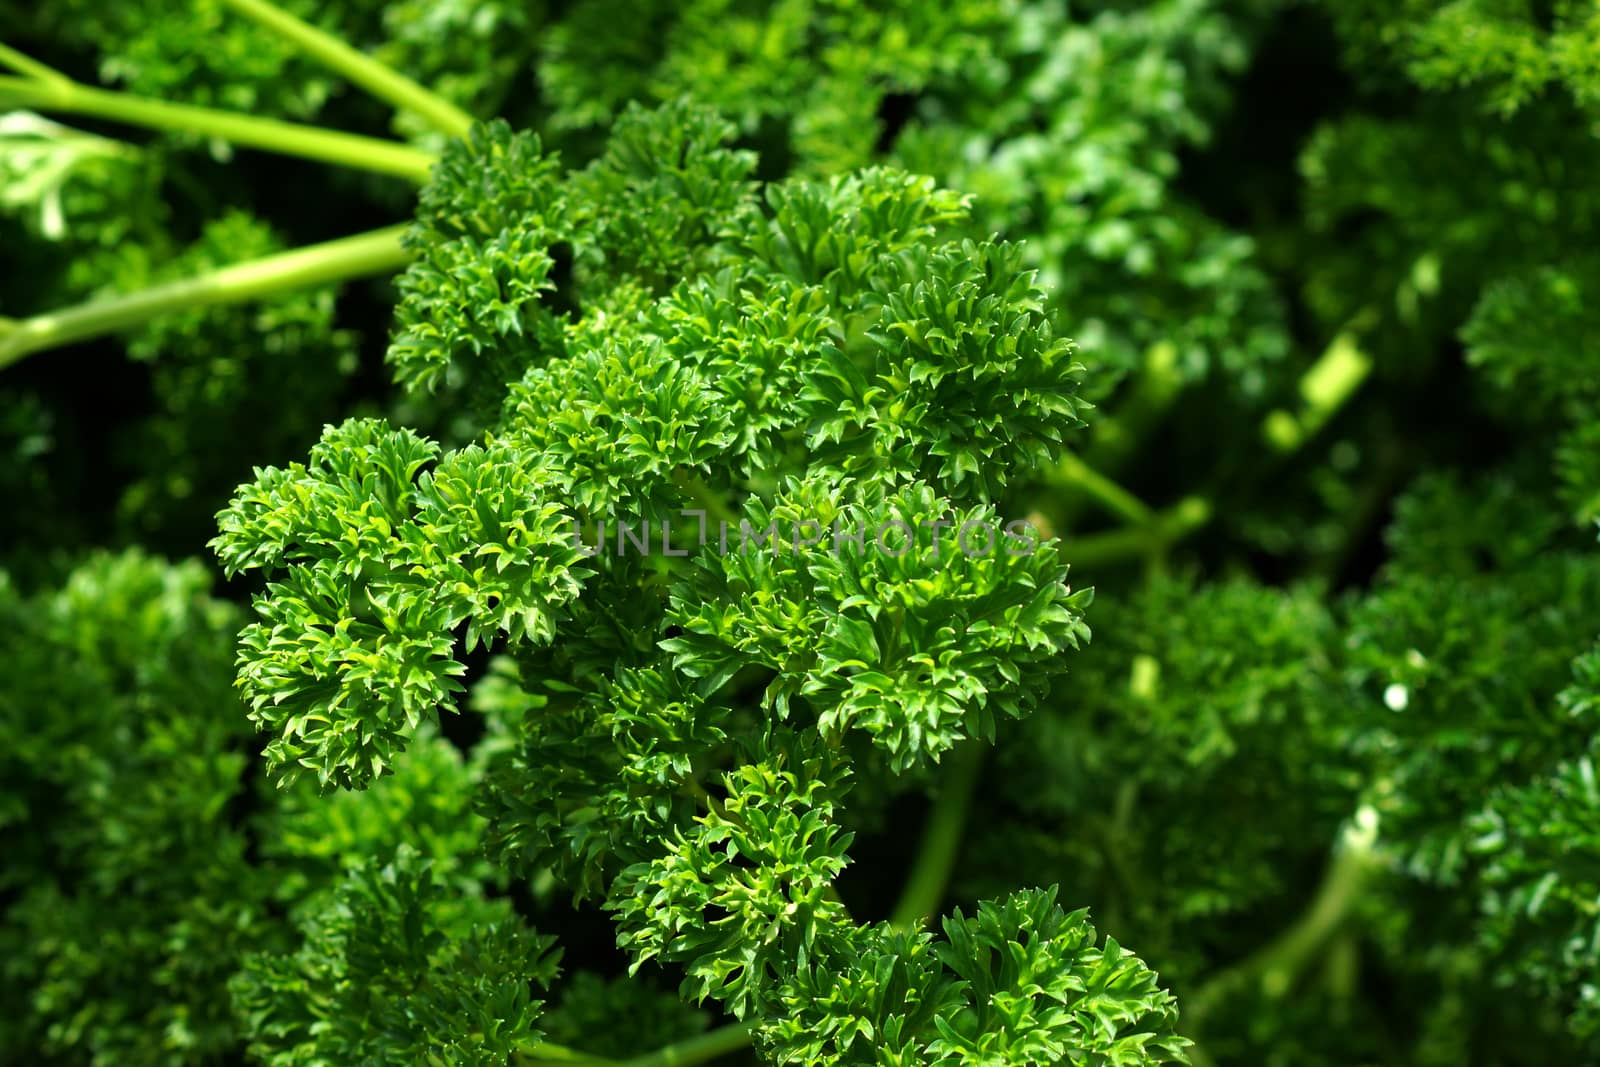 parsley leaves in the garden by Noppharat_th